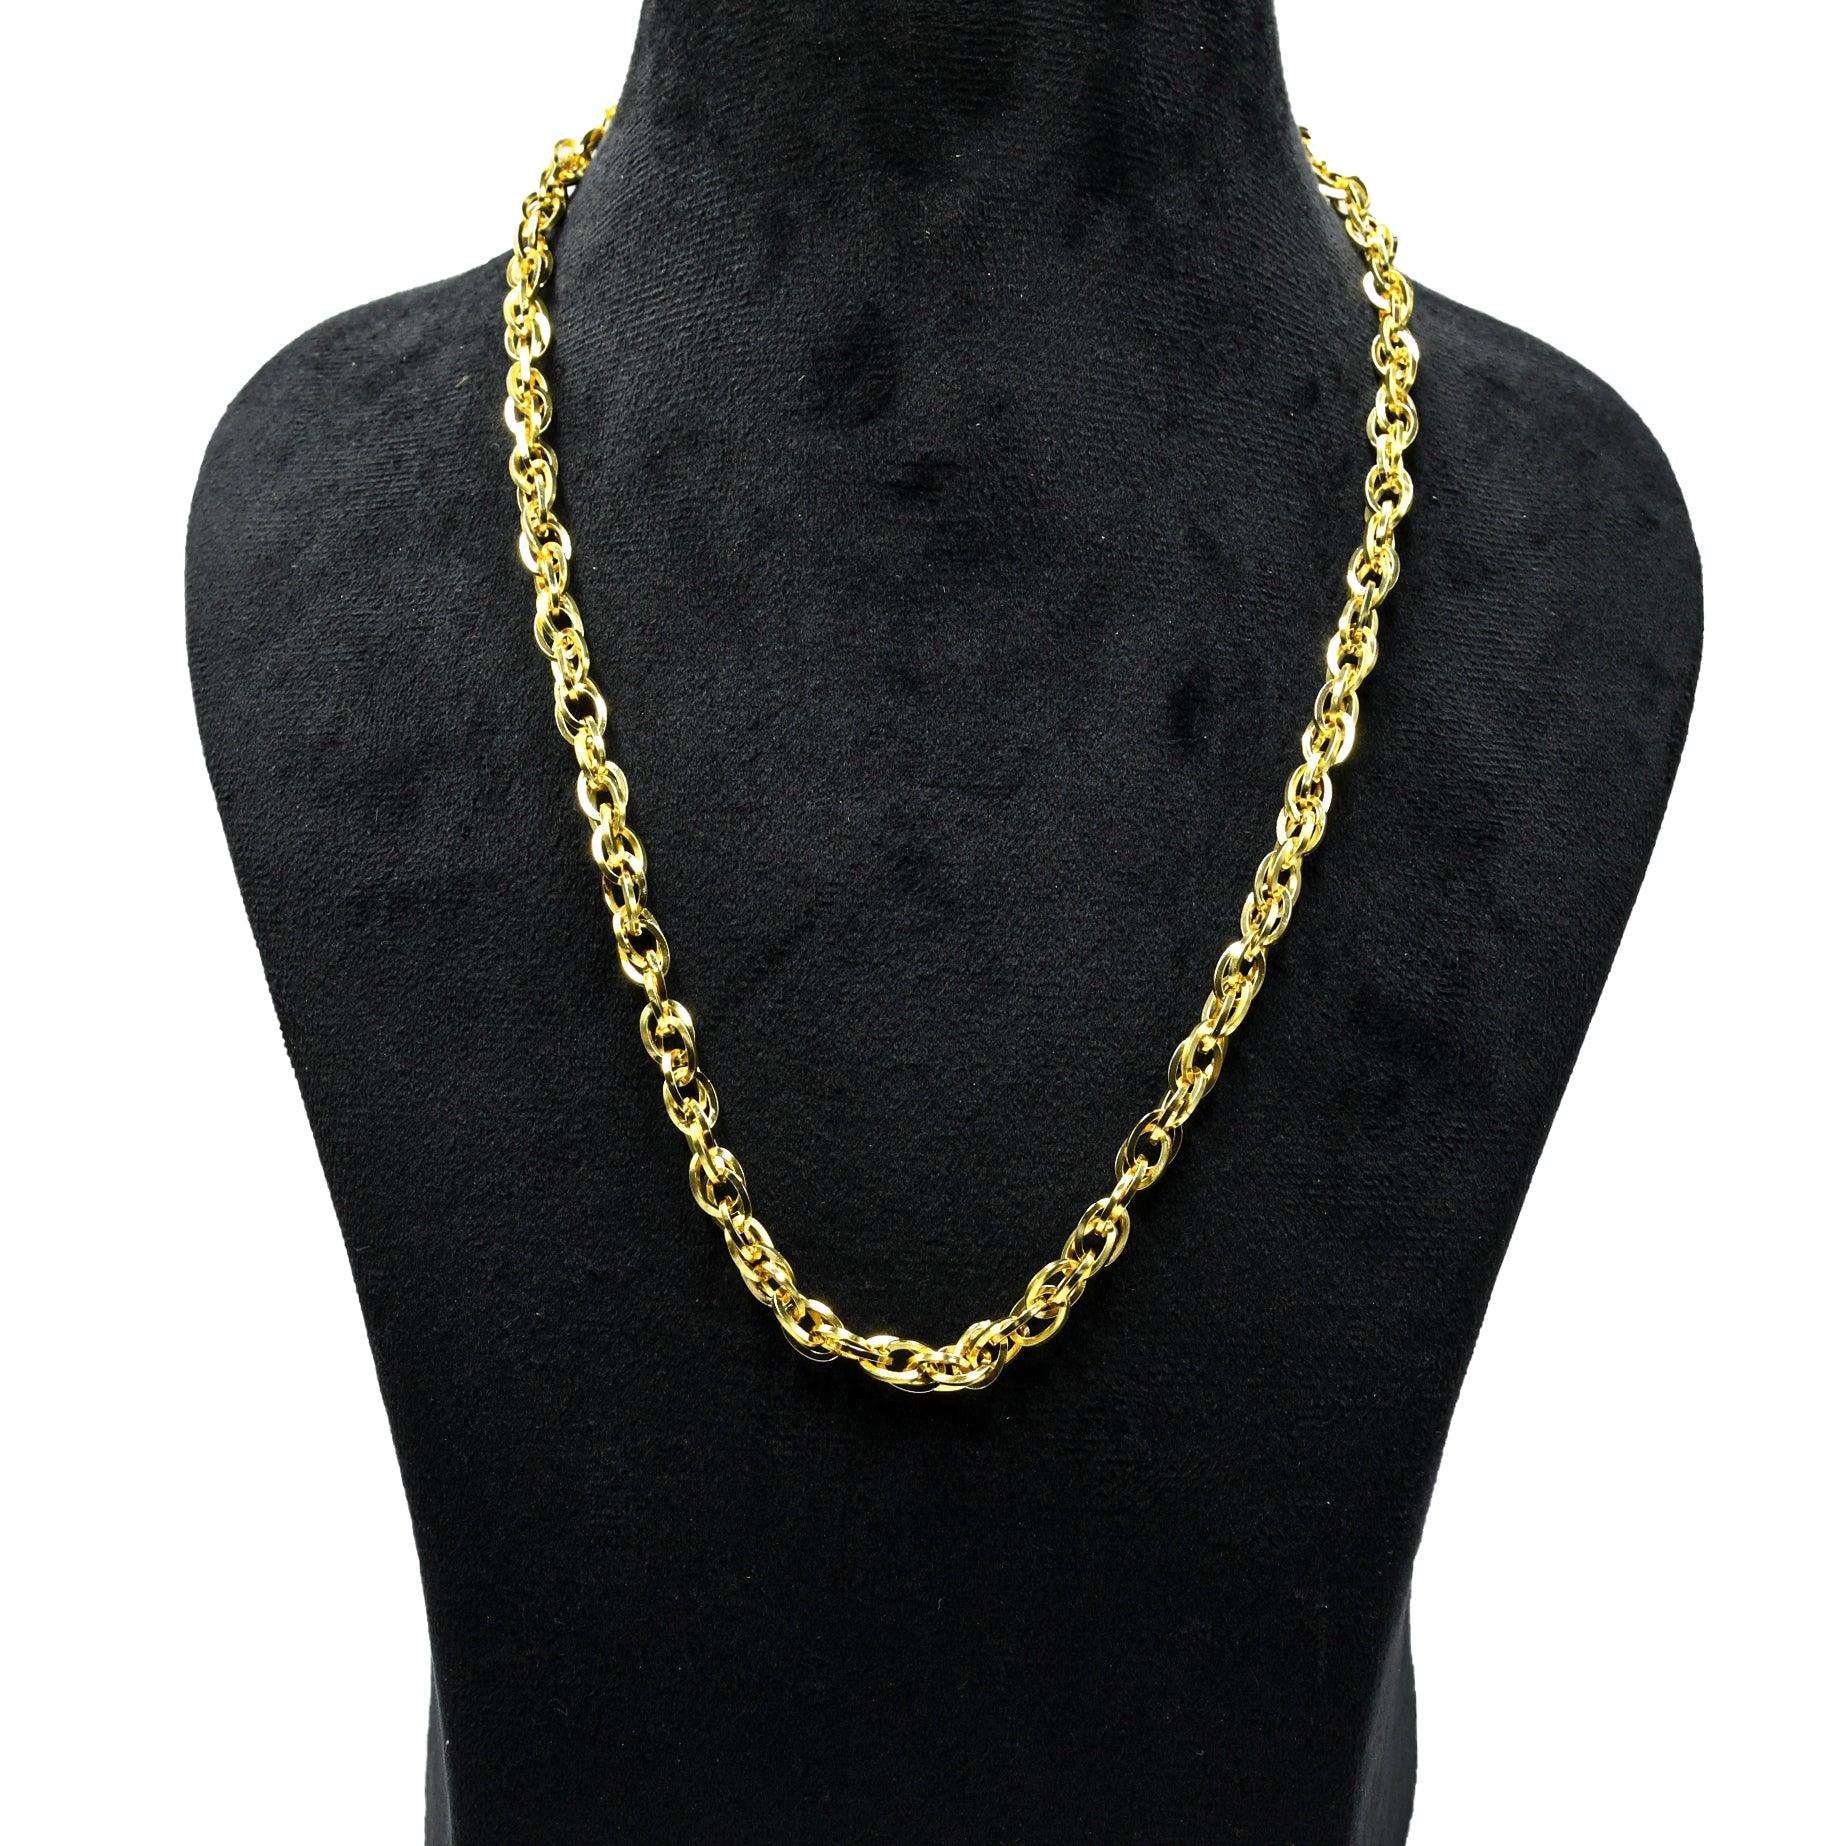 Uneven Oval Brass Gold Plated Chains For Gift - DeKulture DKW-1163-GLC